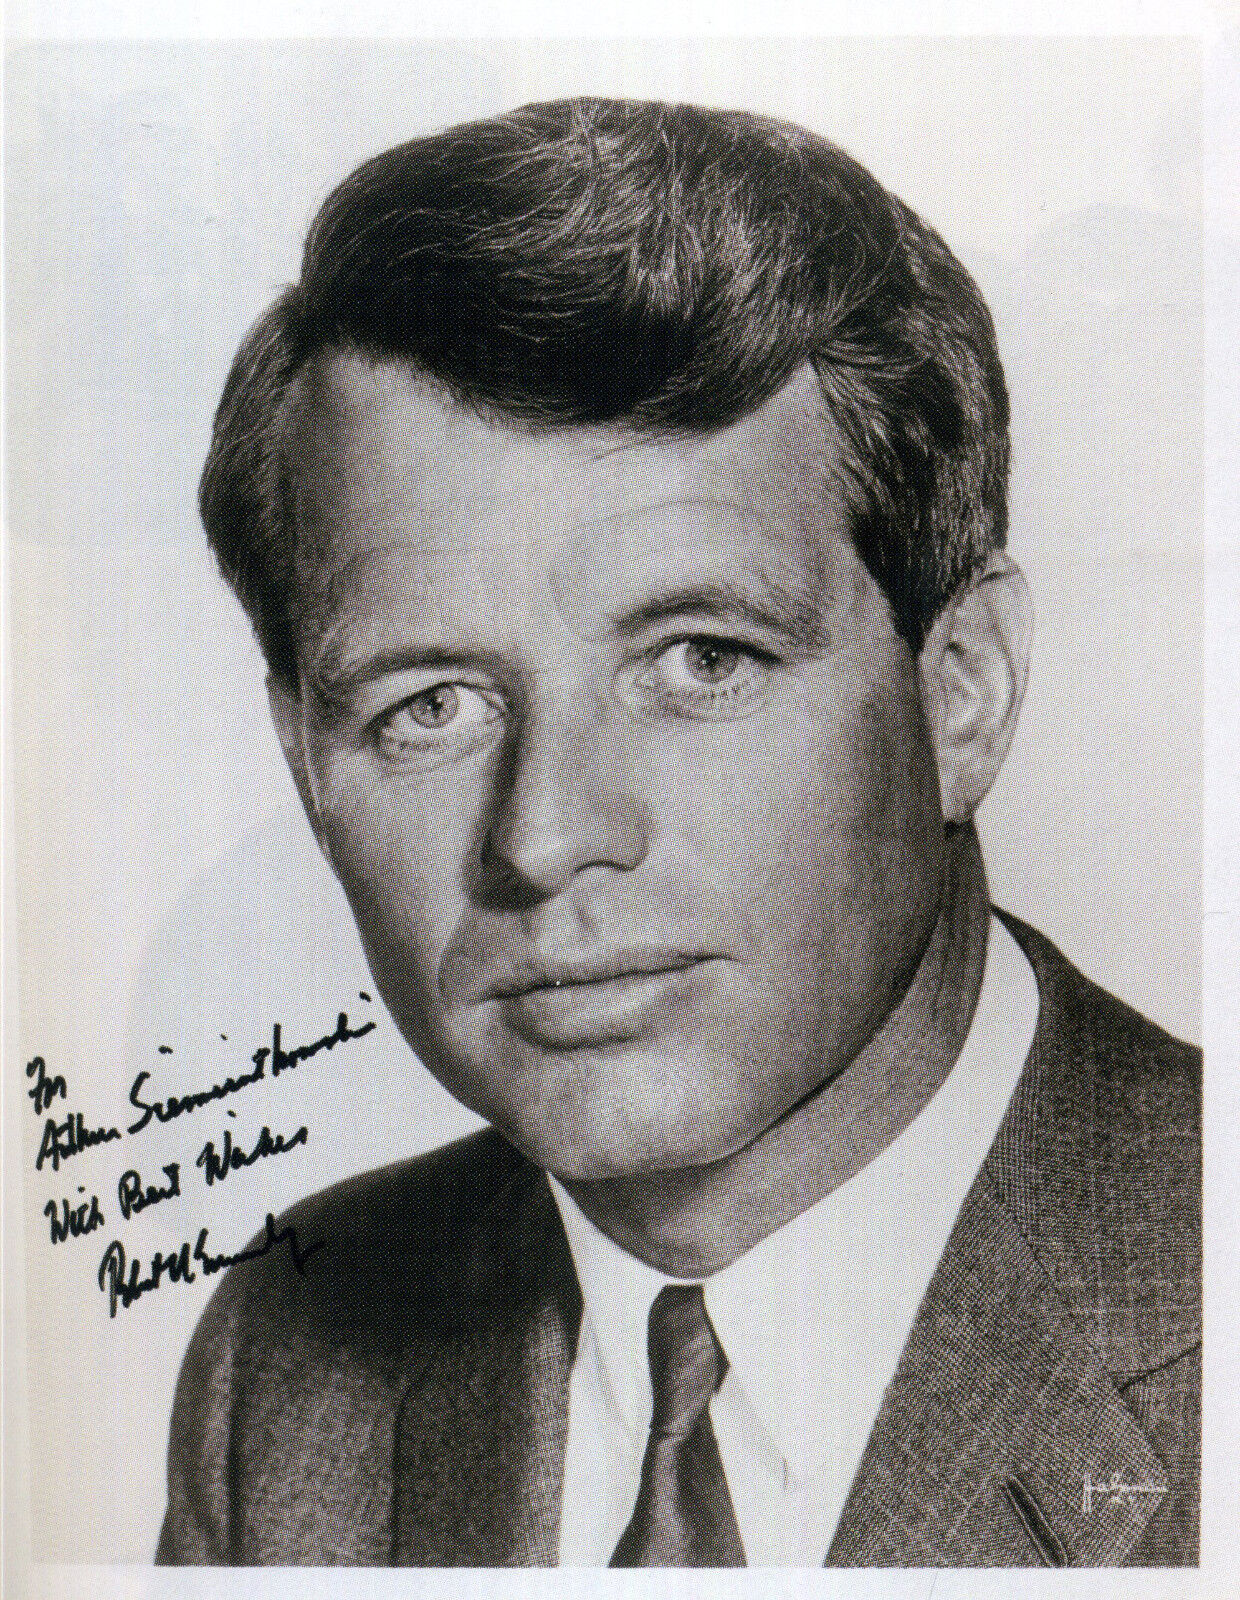 ROBERT 'BOBBY' KENNEDY Signed Photo Poster paintinggraph - former US Politician - preprint